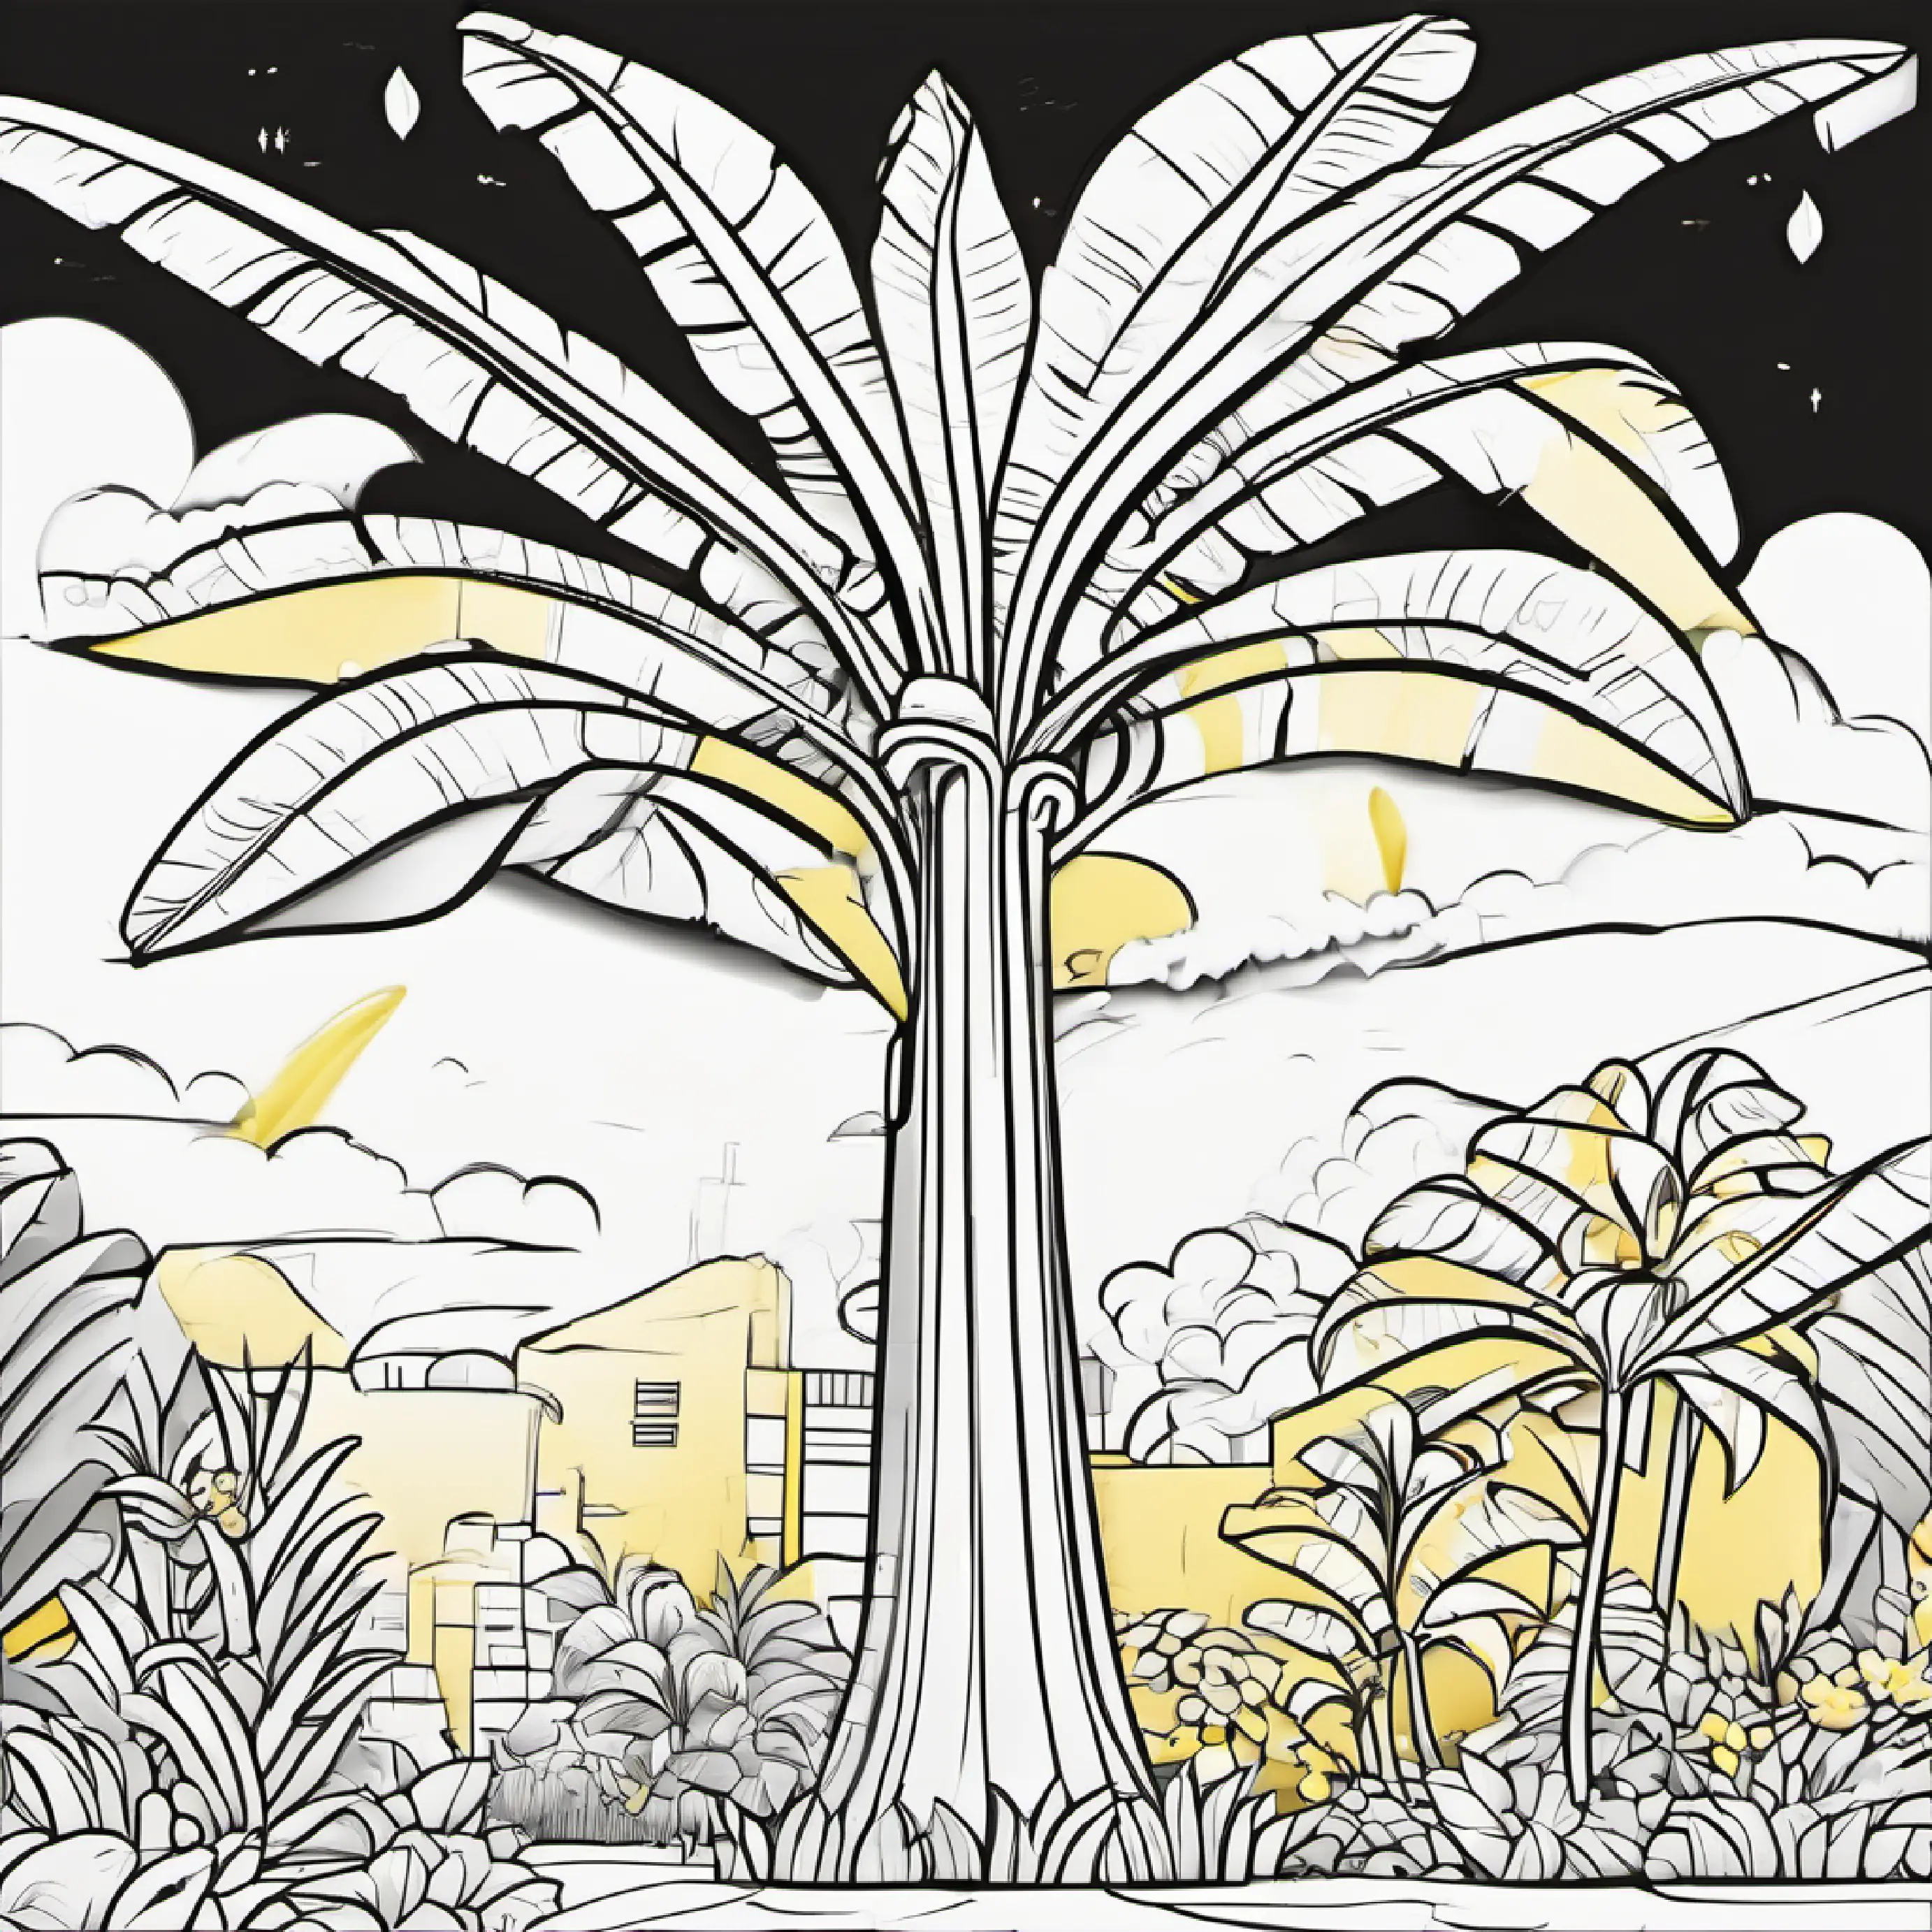 Tall banana tree with a cheerful expression and yellow bunches presents a subtraction question.